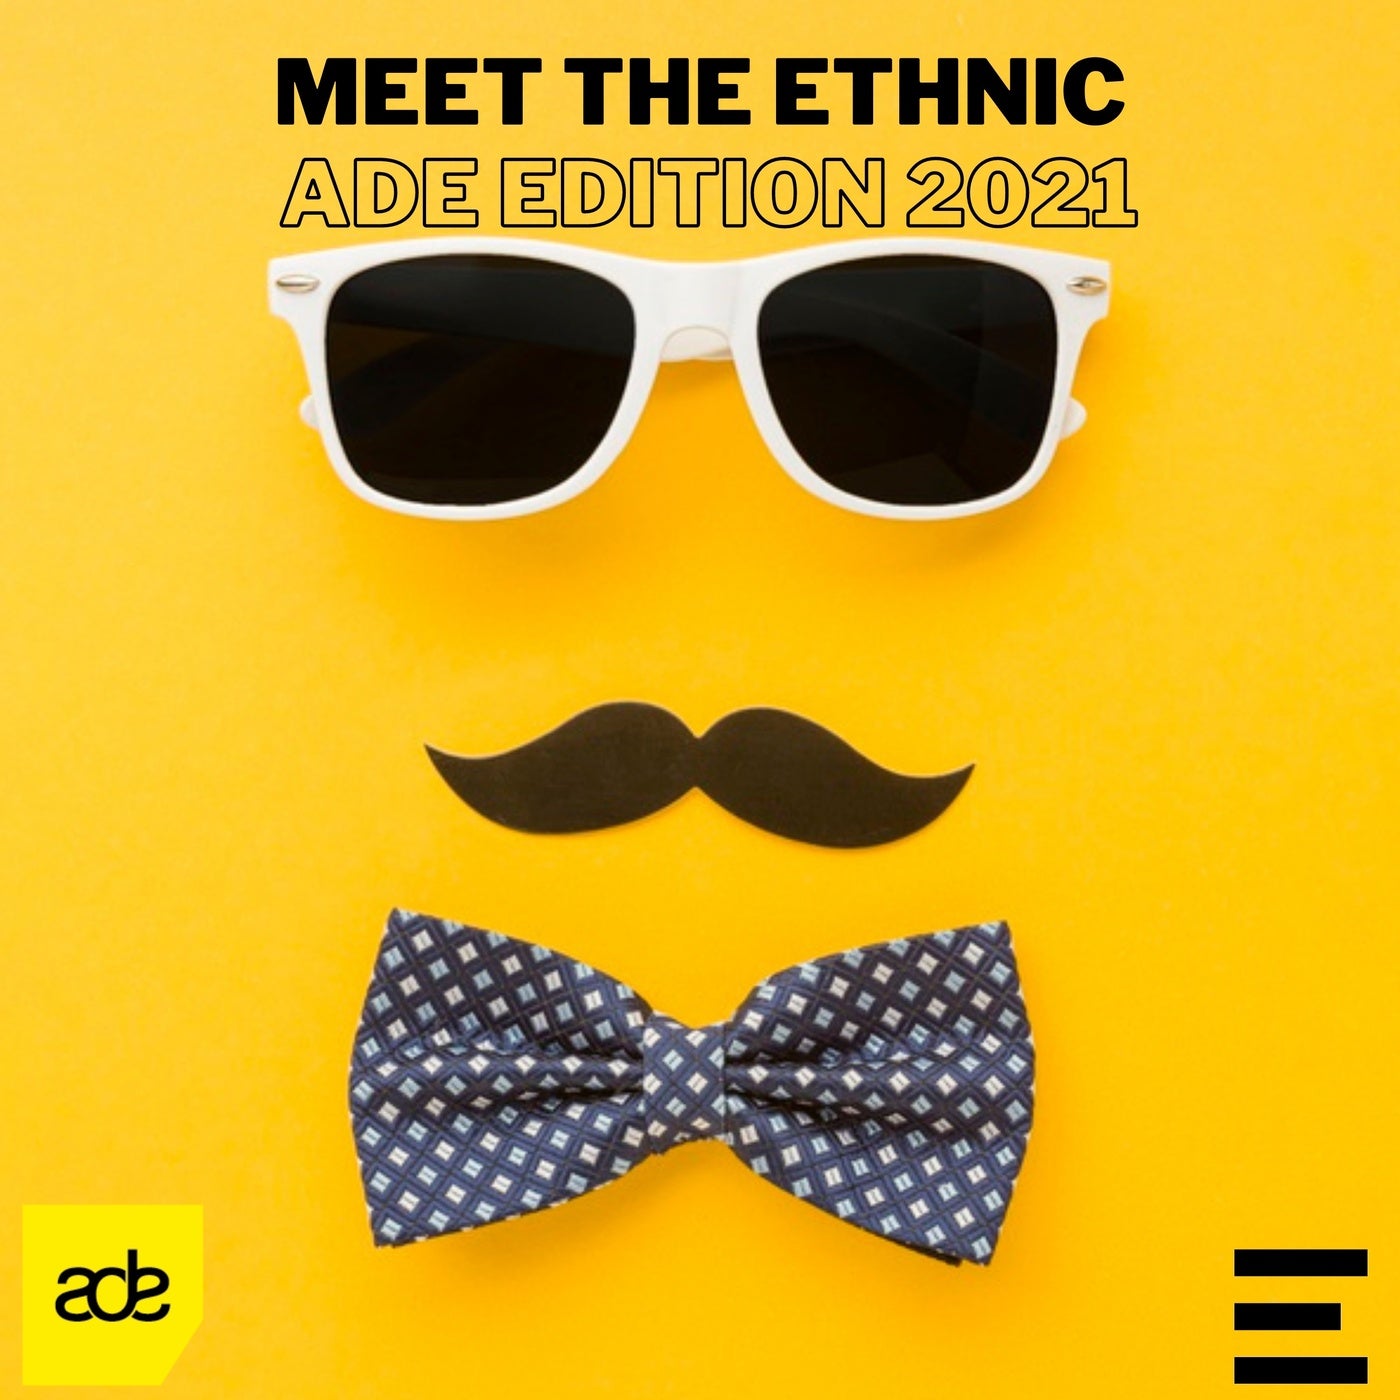 Meet the Ethnic Ade Edition 2021